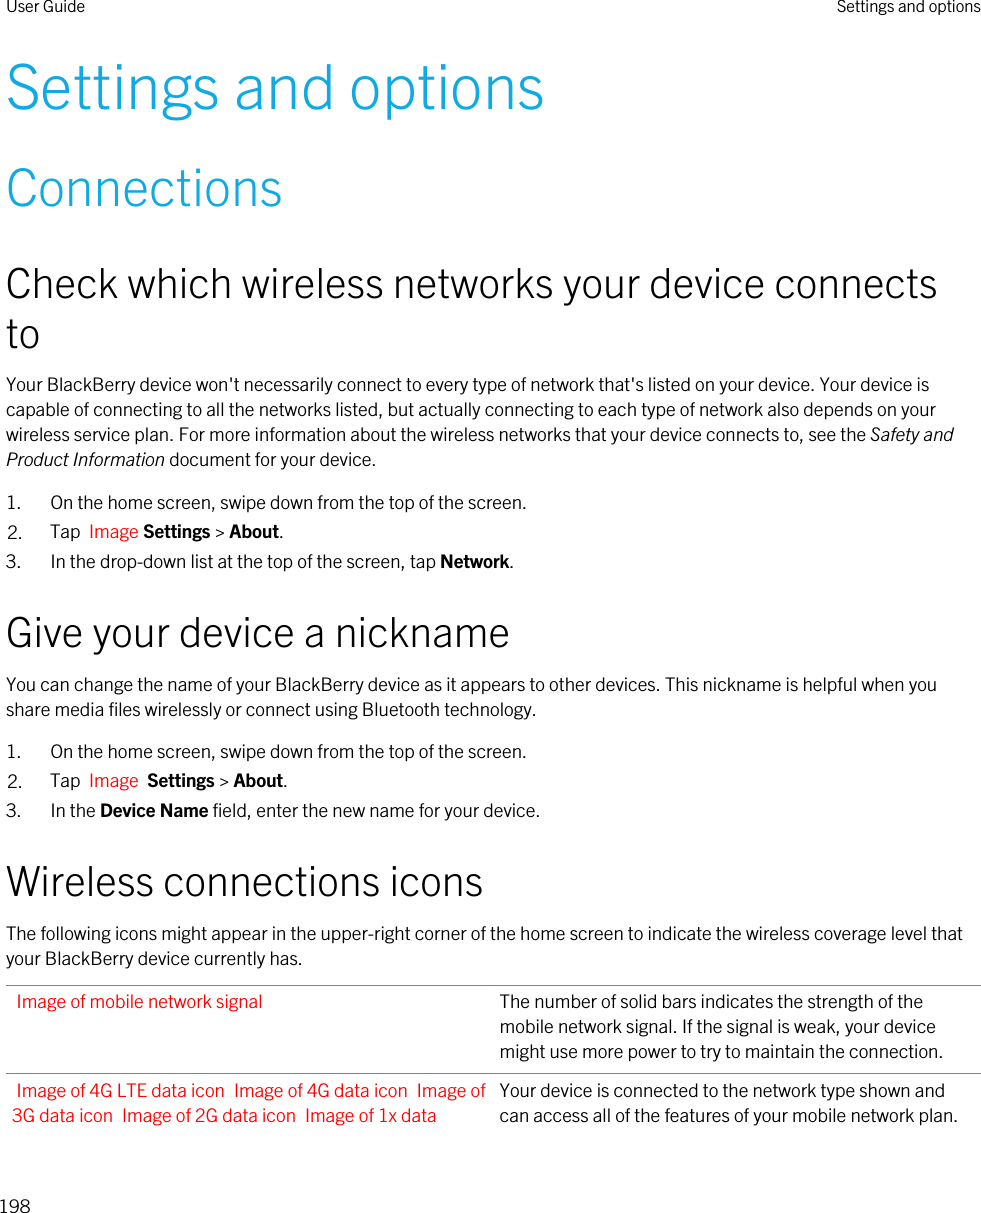 Settings and optionsConnectionsCheck which wireless networks your device connects toYour BlackBerry device won&apos;t necessarily connect to every type of network that&apos;s listed on your device. Your device is capable of connecting to all the networks listed, but actually connecting to each type of network also depends on your wireless service plan. For more information about the wireless networks that your device connects to, see the Safety and Product Information document for your device.1. On the home screen, swipe down from the top of the screen.2. Tap  Image Settings &gt; About.3. In the drop-down list at the top of the screen, tap Network.Give your device a nicknameYou can change the name of your BlackBerry device as it appears to other devices. This nickname is helpful when you share media files wirelessly or connect using Bluetooth technology.1. On the home screen, swipe down from the top of the screen.2. Tap  Image  Settings &gt; About.3. In the Device Name field, enter the new name for your device.Wireless connections iconsThe following icons might appear in the upper-right corner of the home screen to indicate the wireless coverage level that your BlackBerry device currently has.Image of mobile network signal The number of solid bars indicates the strength of the mobile network signal. If the signal is weak, your device might use more power to try to maintain the connection.Image of 4G LTE data icon Image of 4G data icon Image of 3G data icon Image of 2G data icon Image of 1x data Your device is connected to the network type shown and can access all of the features of your mobile network plan.User Guide Settings and options198